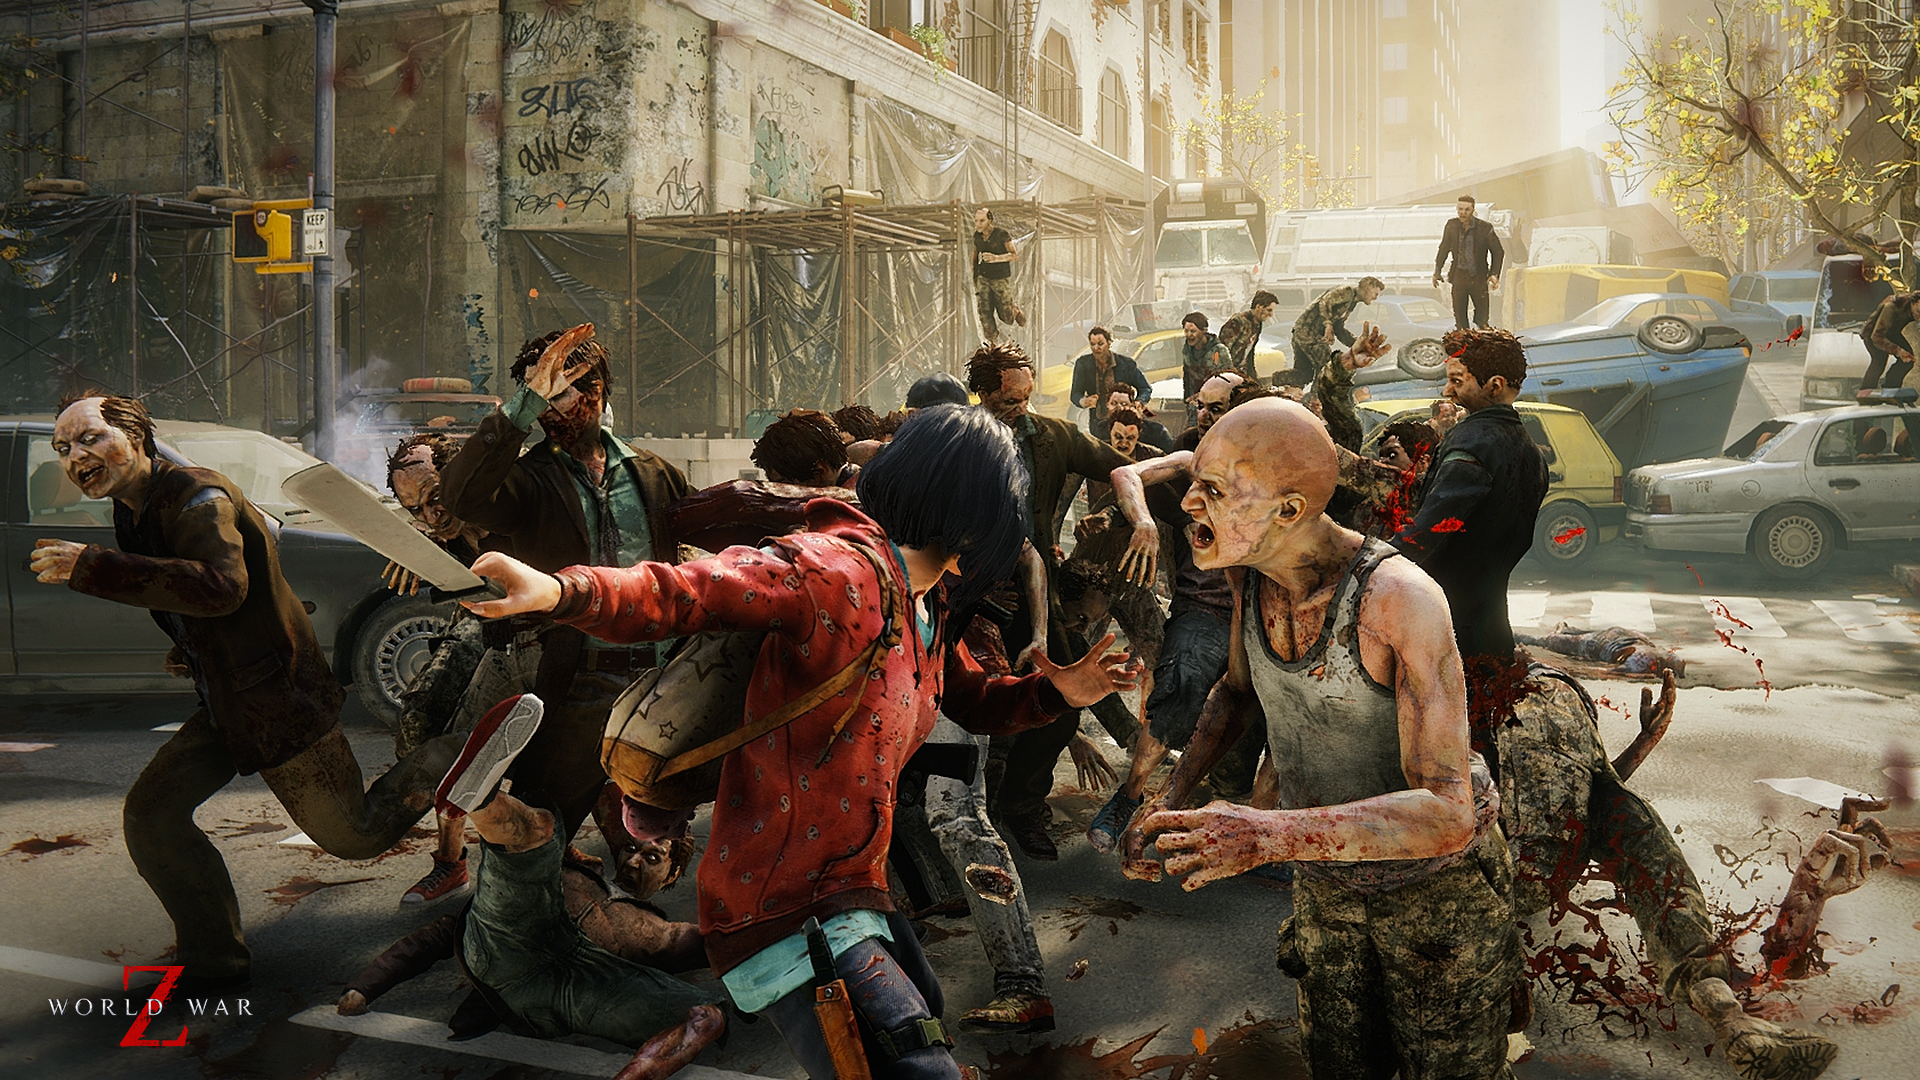 World War Z: Aftermath (PS5) This ZOMBIE Game is INSANE